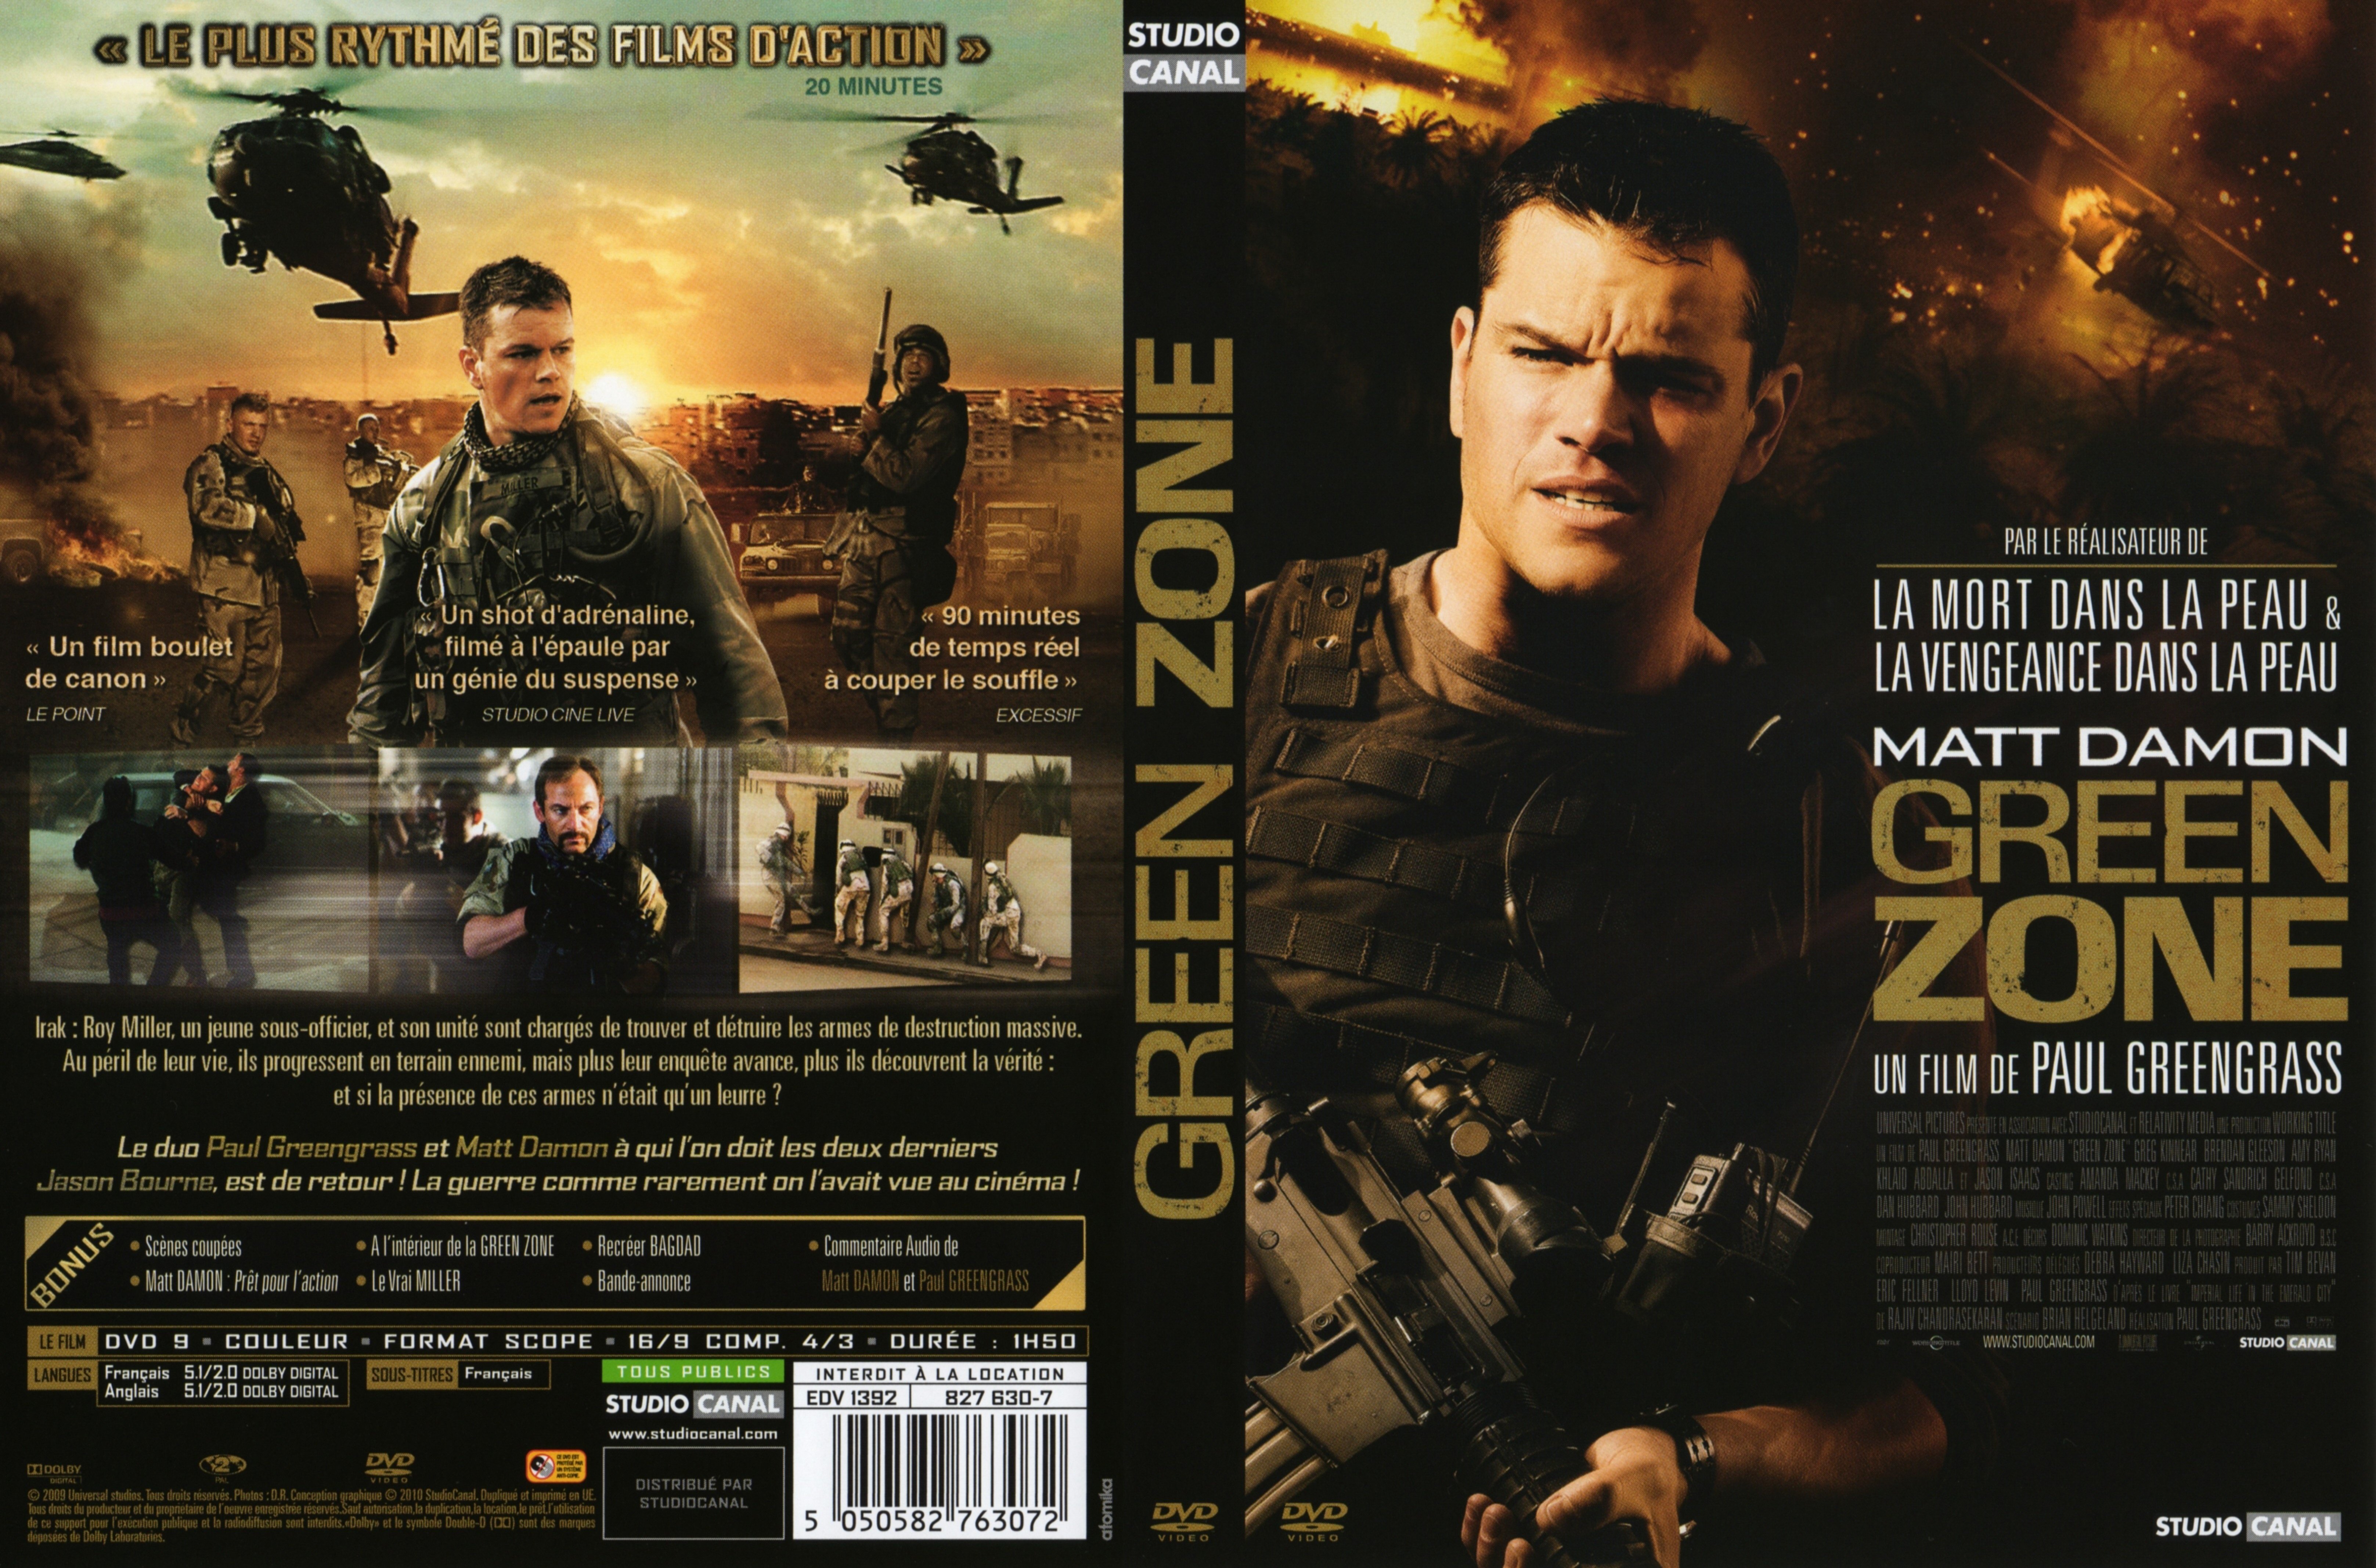 Jaquette DVD Green zone